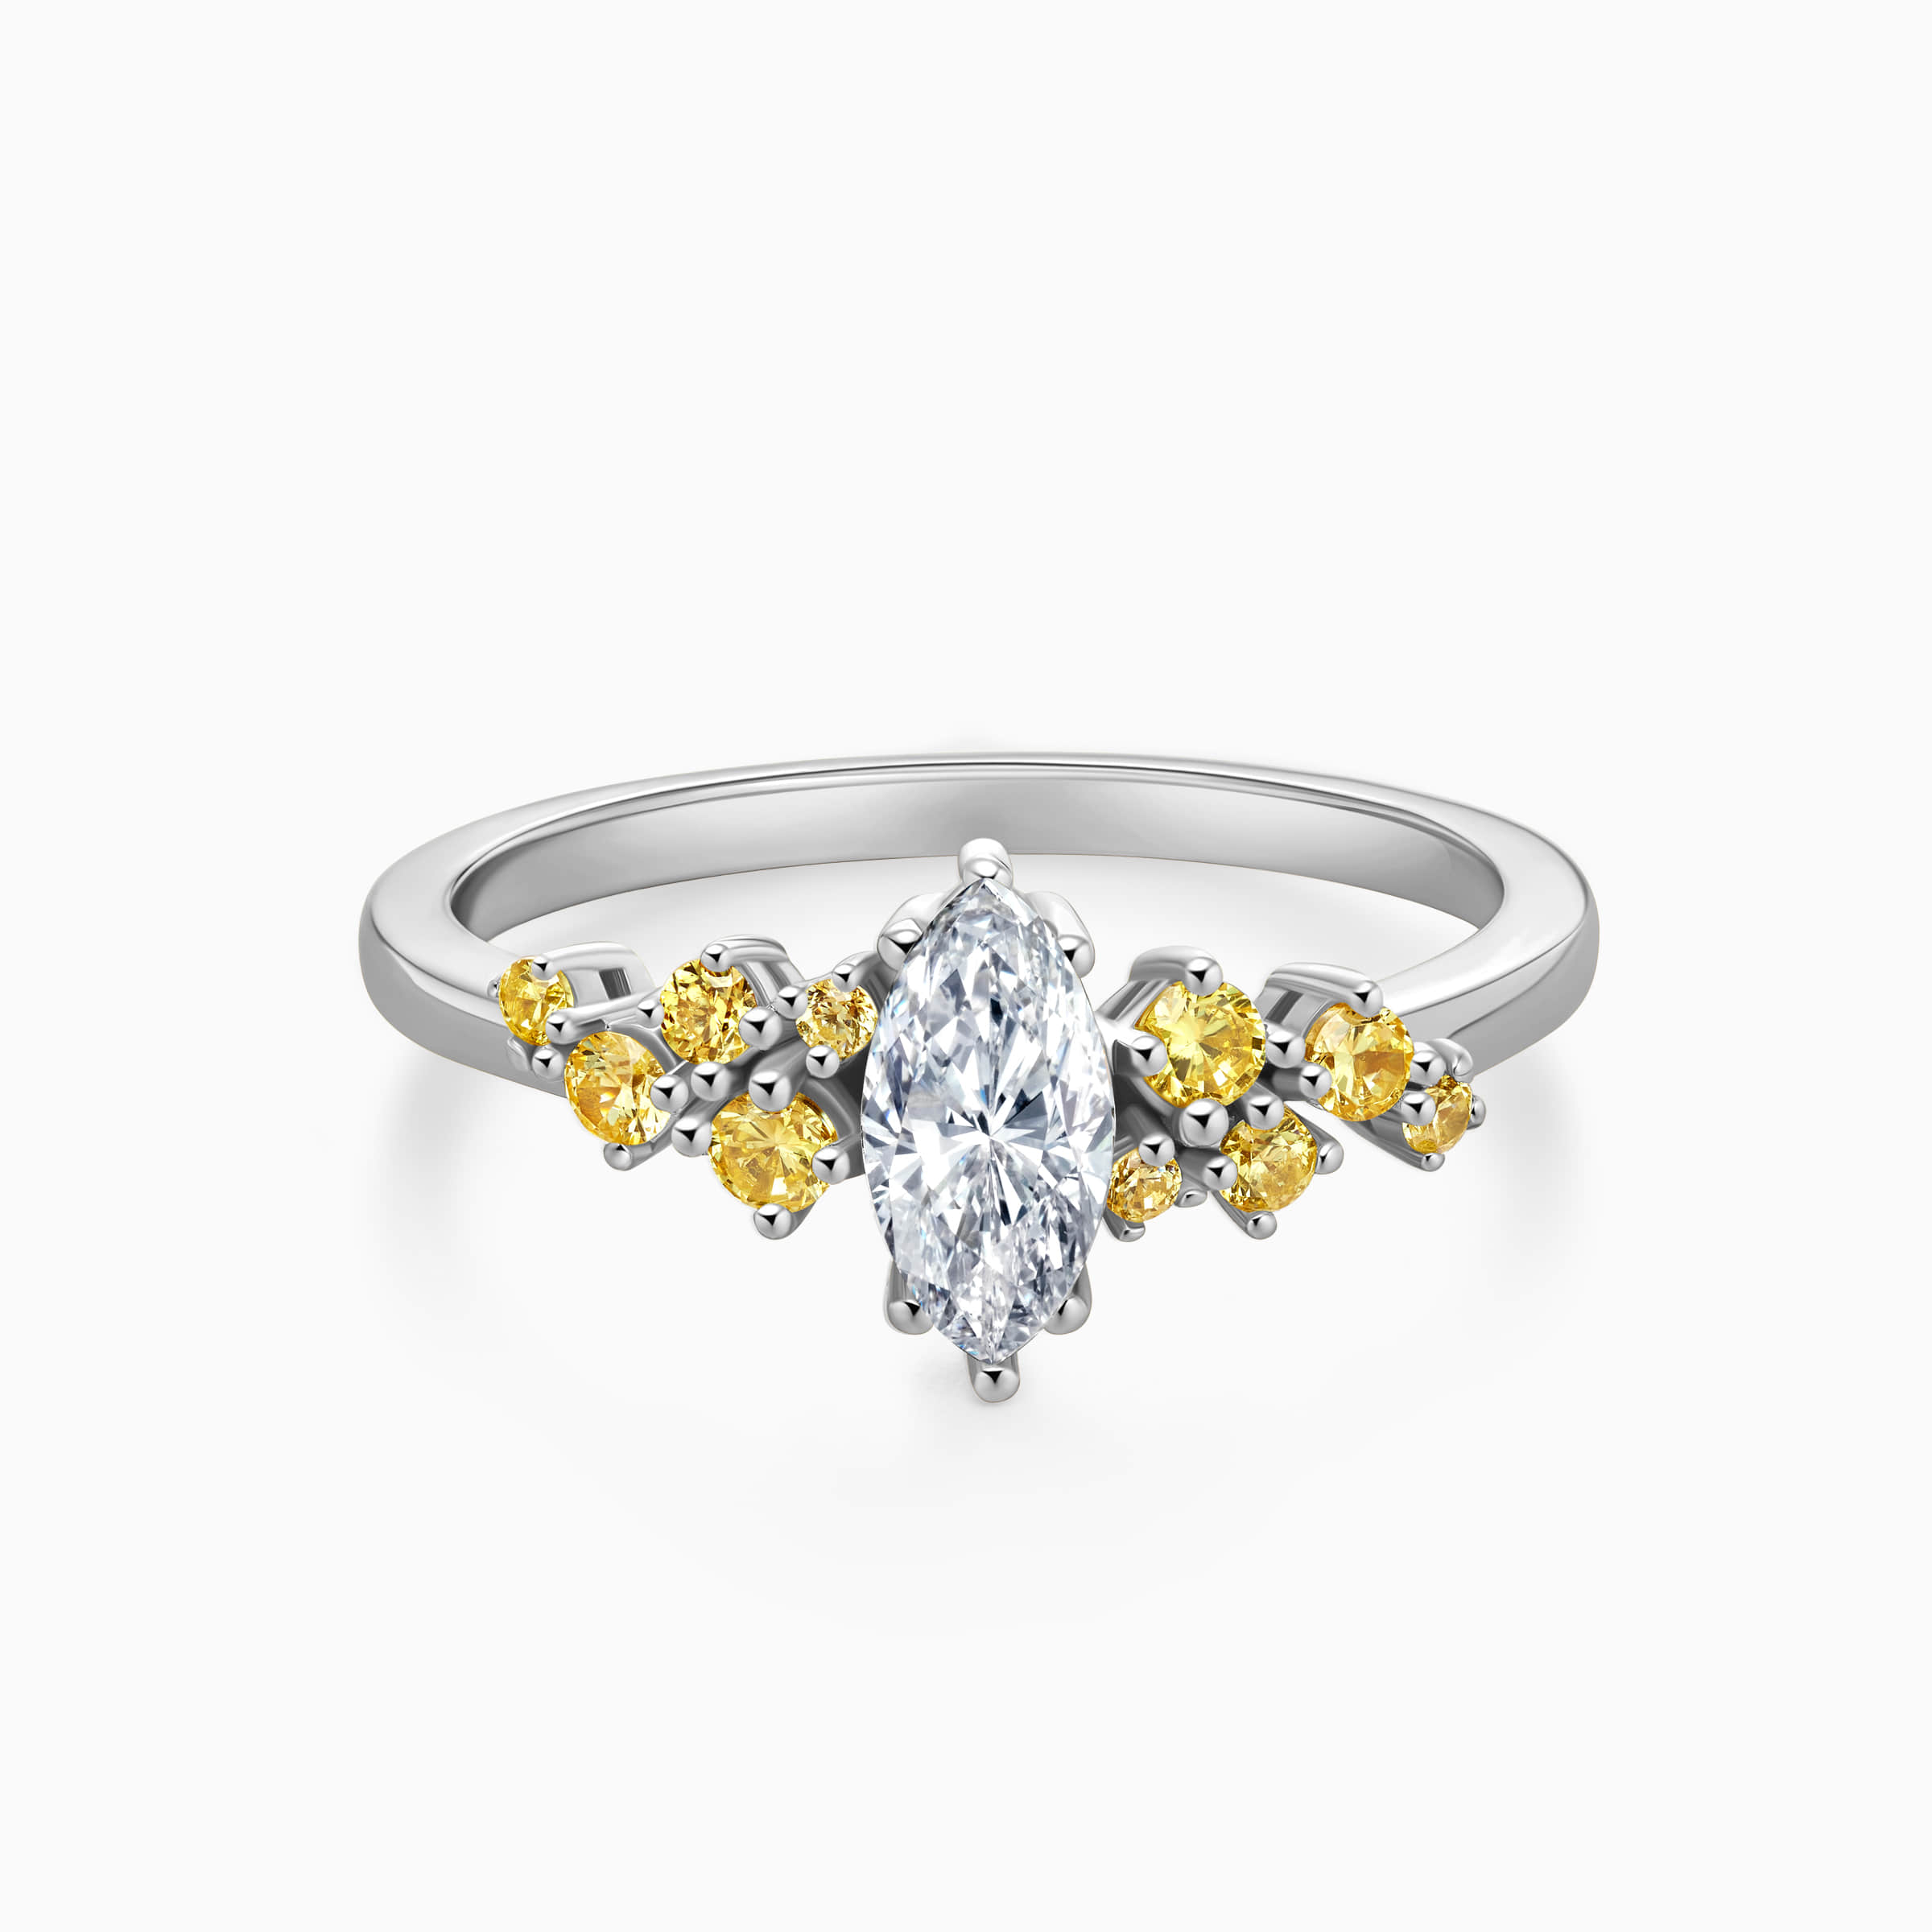 Darry Ring marquise-cut engagement ring with yellow diamond